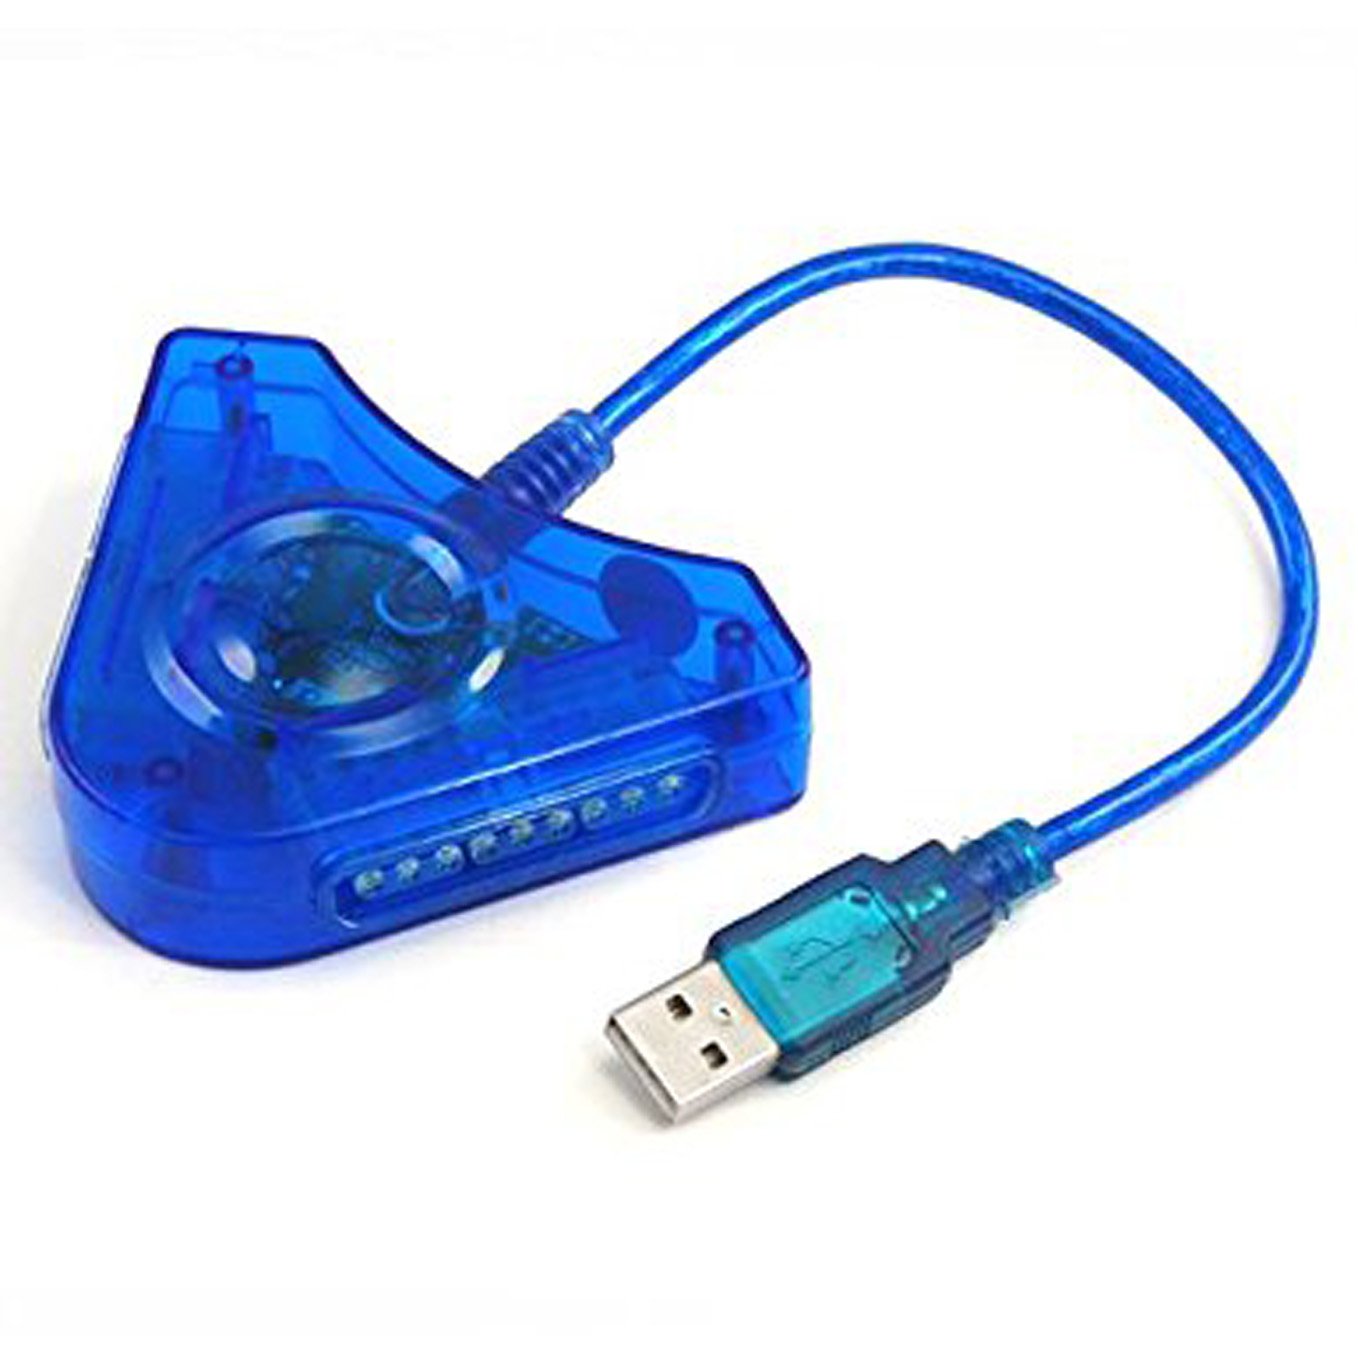 New World Dual PS2 to PC PS3 USB Game Controller Converter Adapter Blue